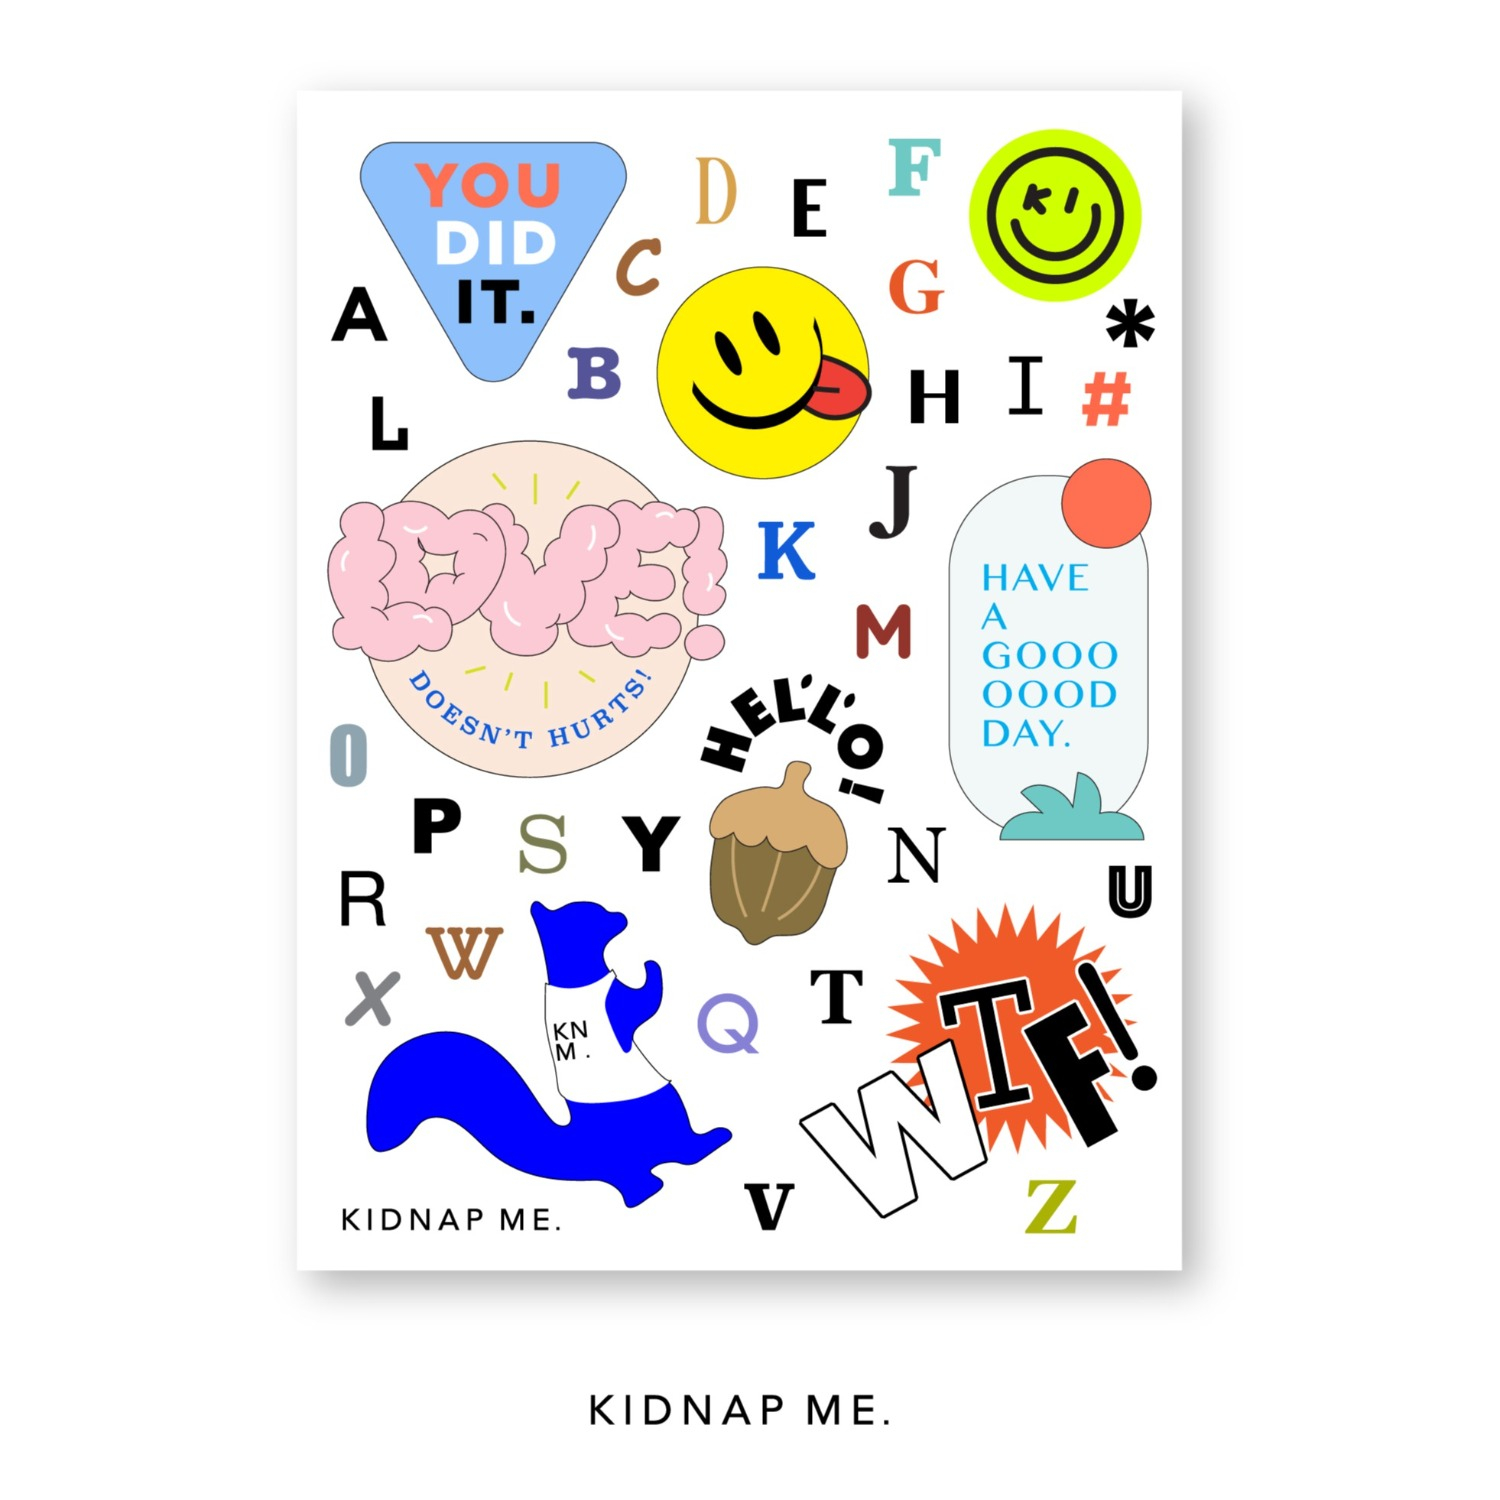 KIDNAP ME STICKER (LETTERS)